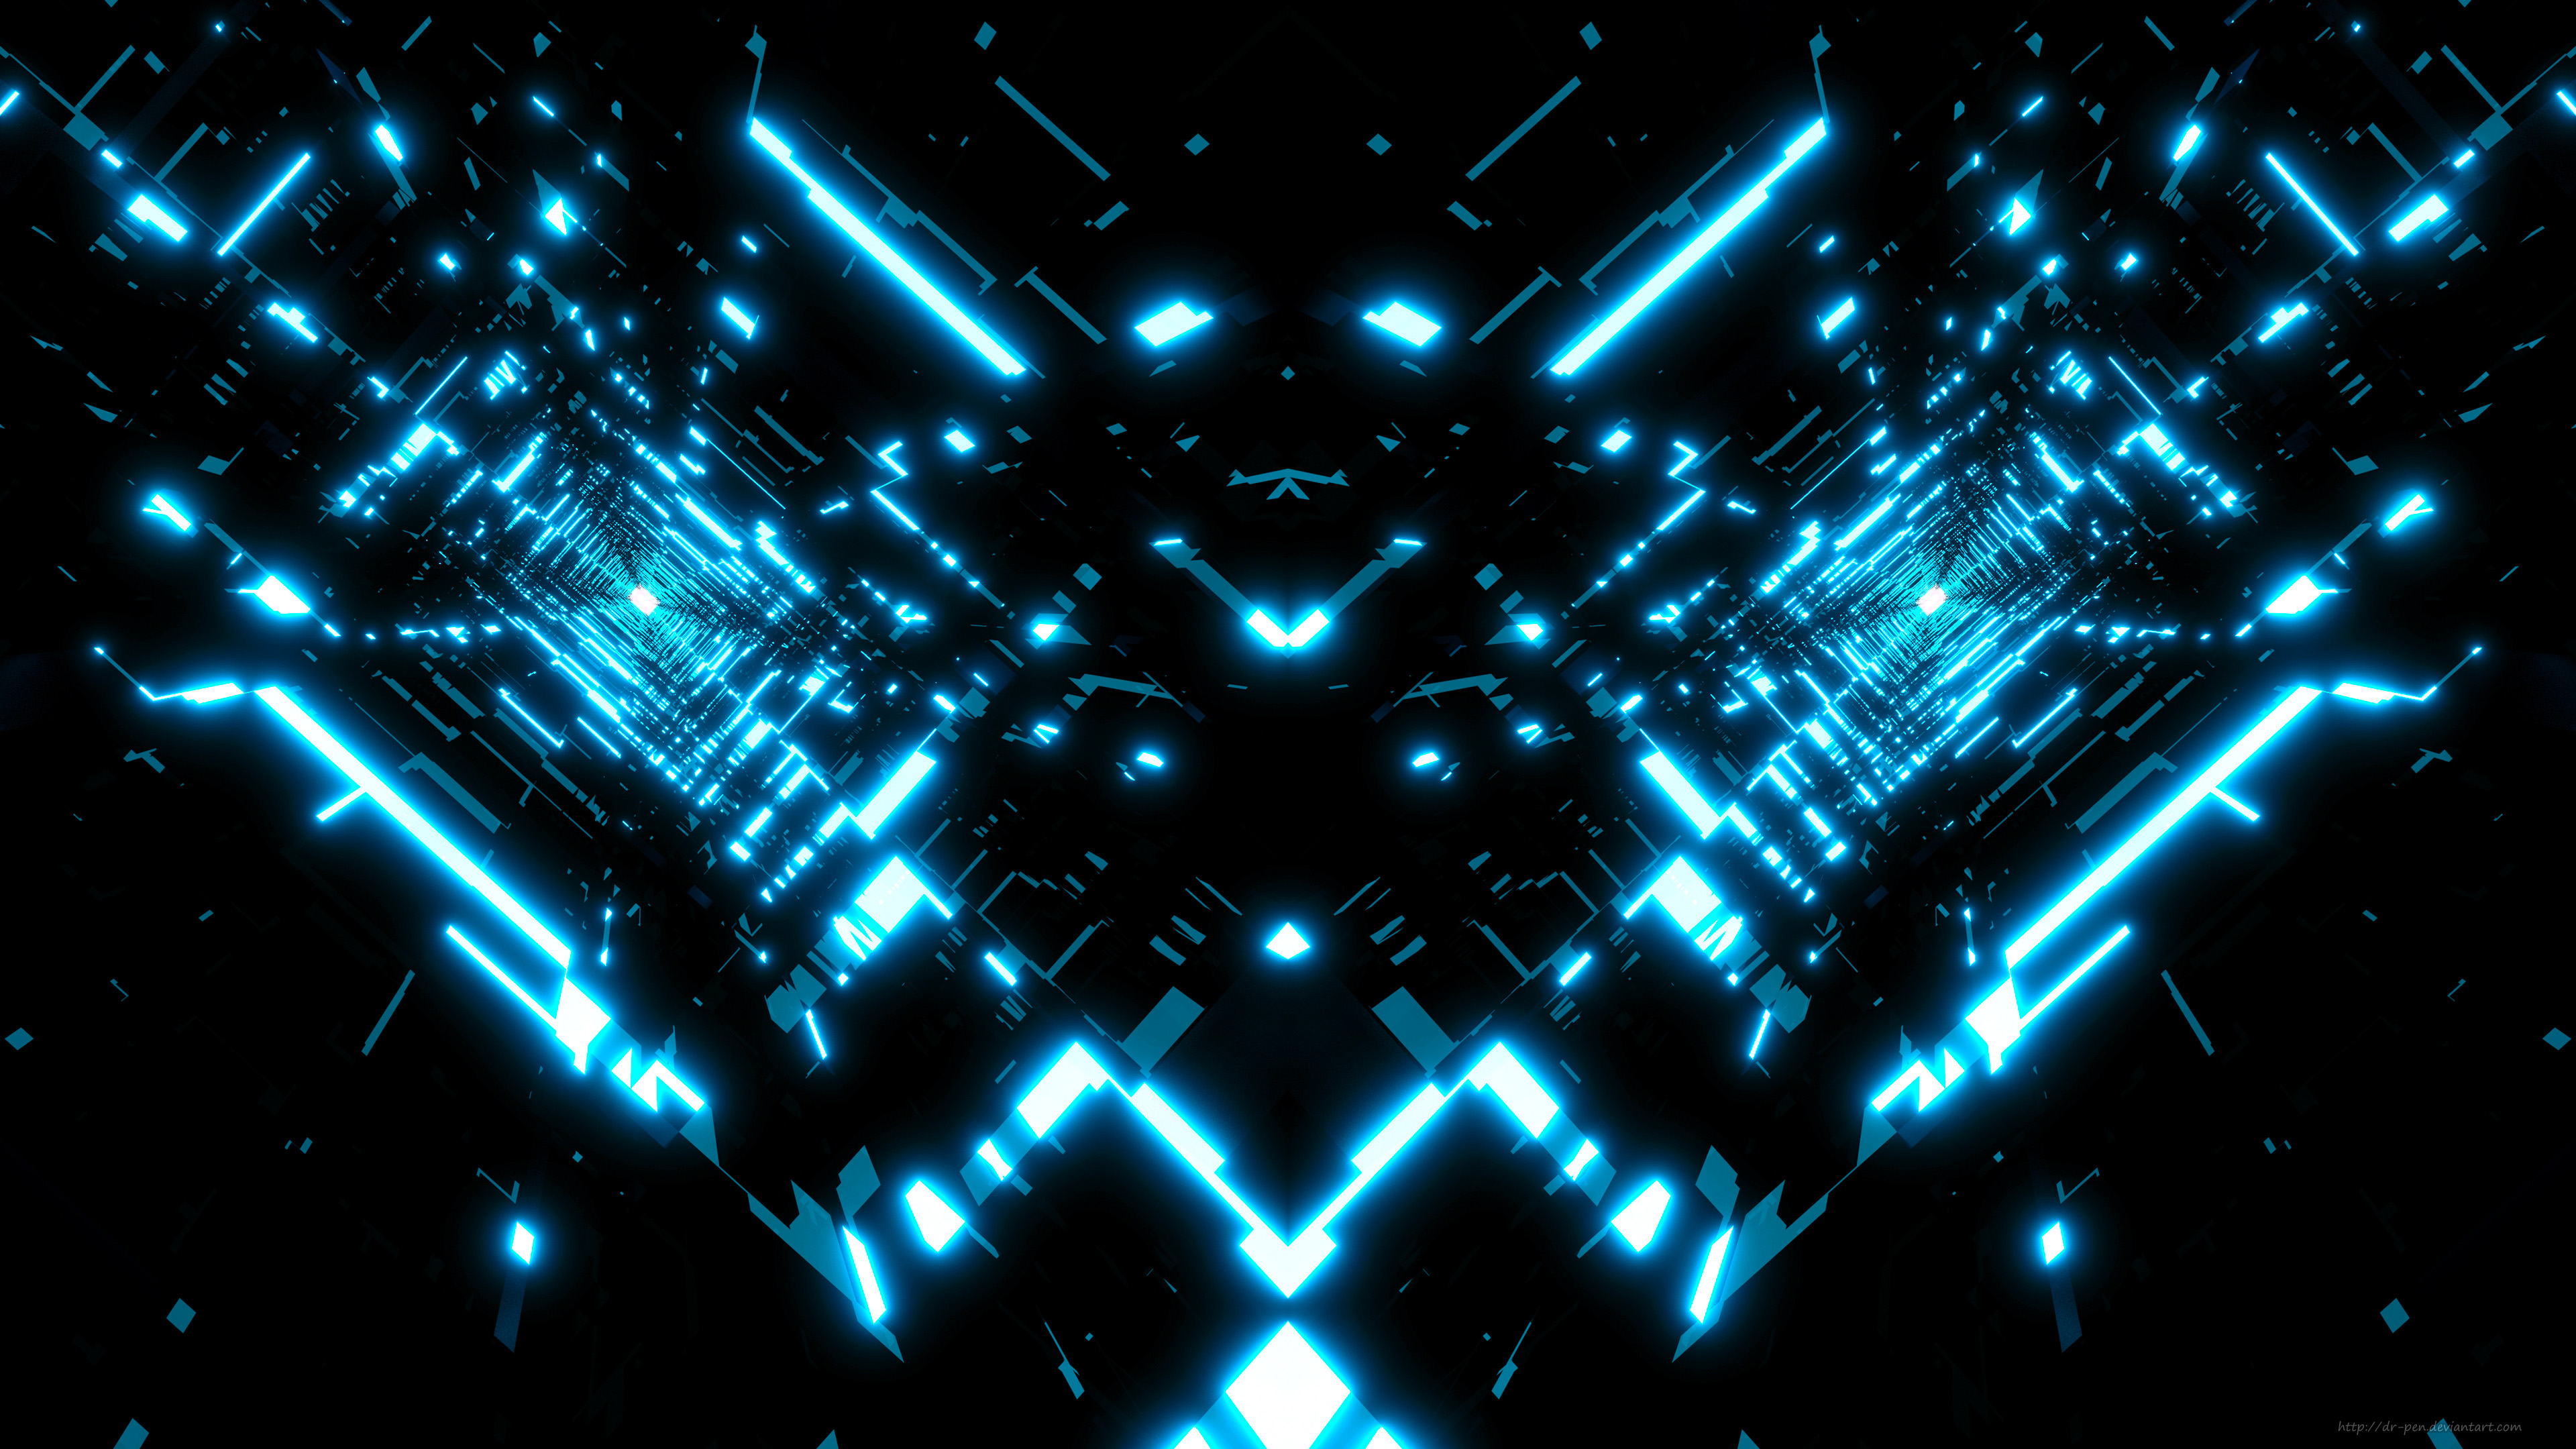 symmetry, geometry, 3d, artistic, abstract, blue, cgi